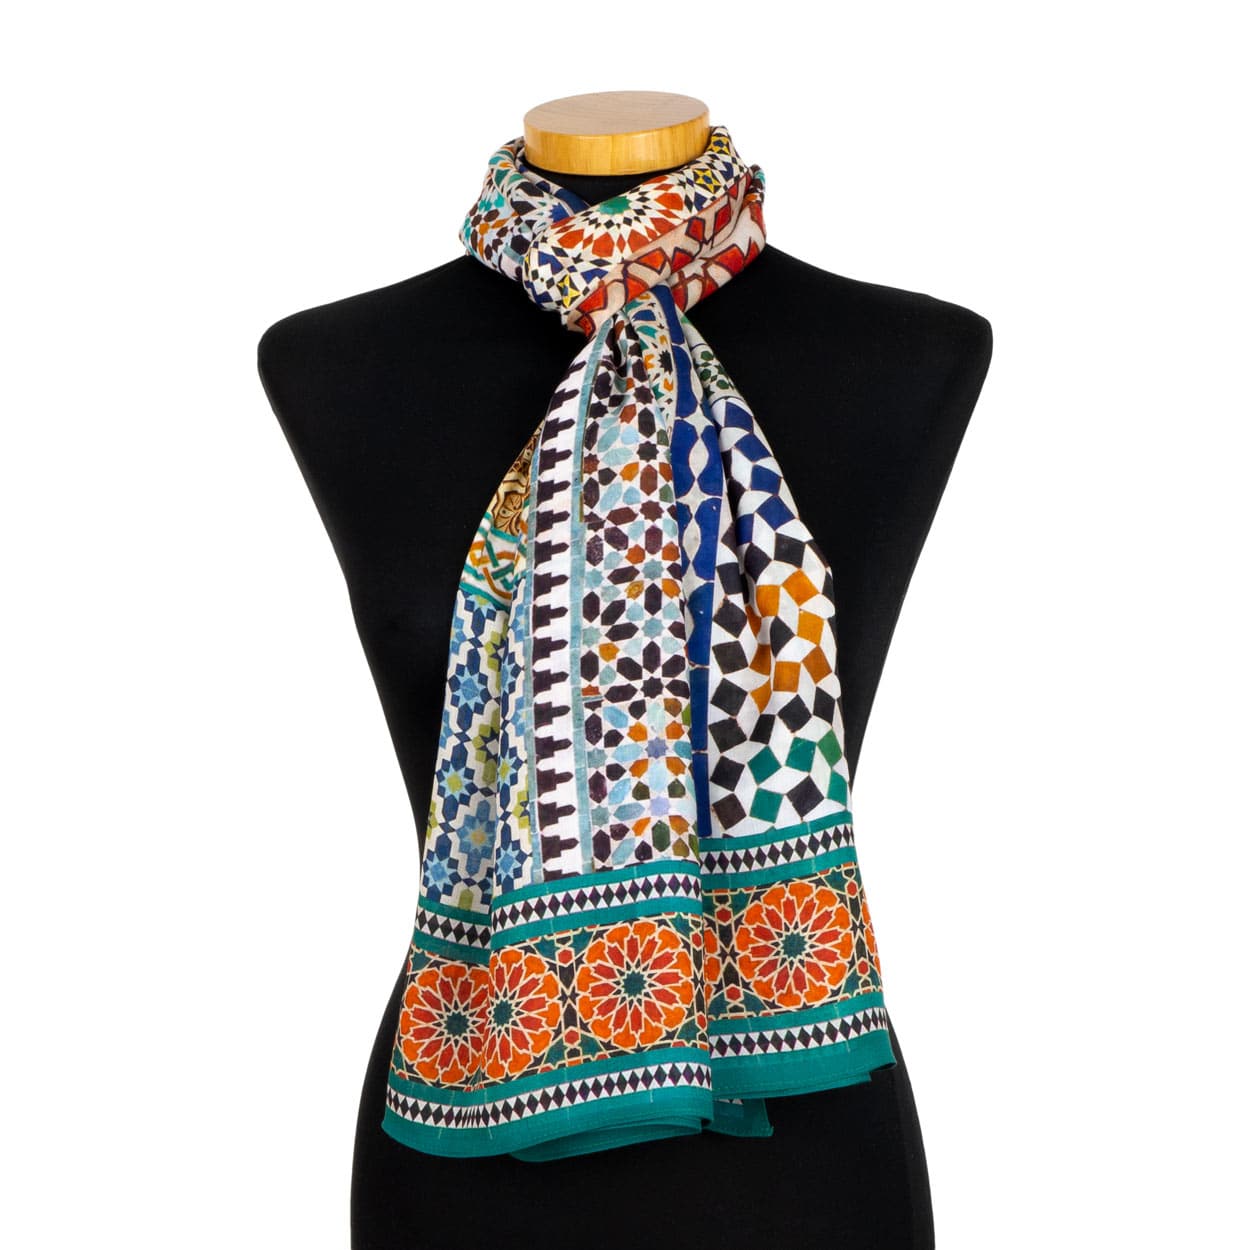 scarf with mosaic pattern inspired by the alhambra mosaics